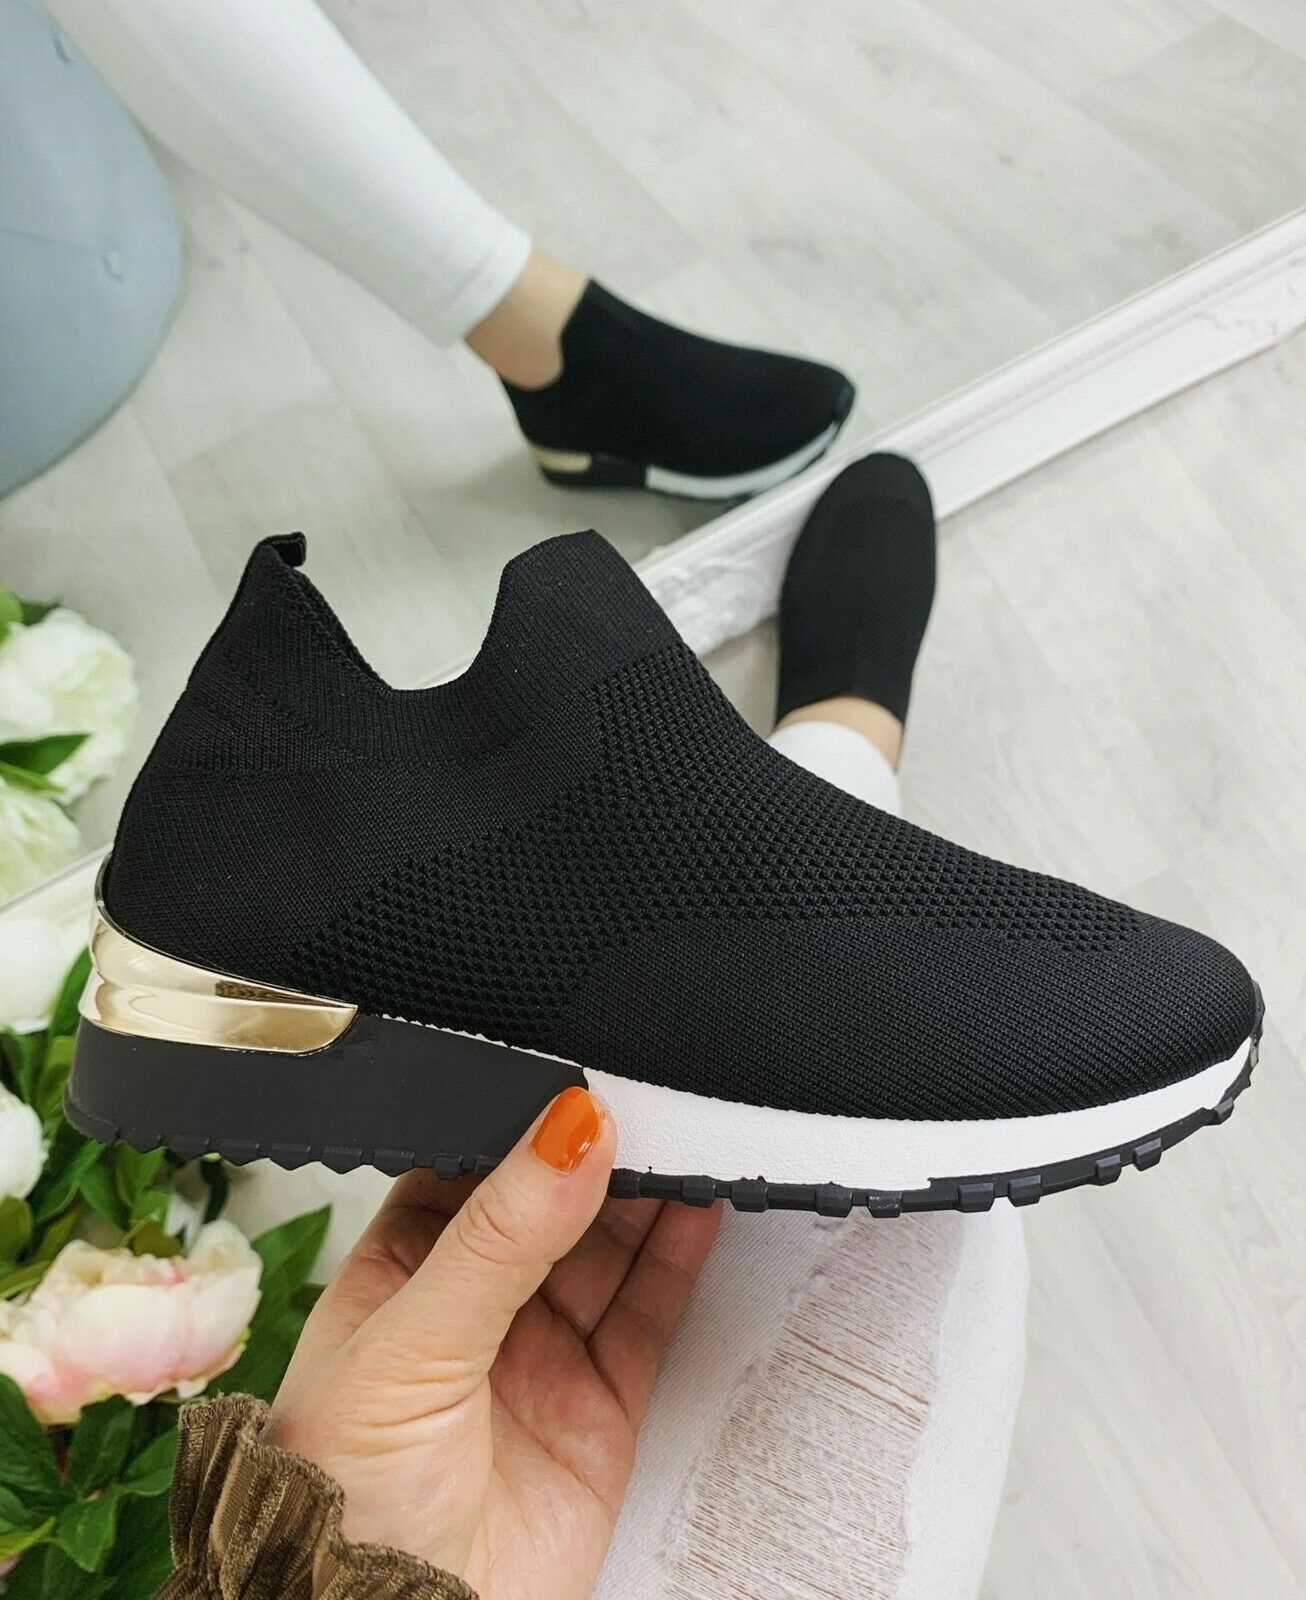 UK Size 3 EUR Size 36 Black Ladies Womens Slip on Sock Wedge Sneakers Classic Jogging Pumps Shoes Trainers